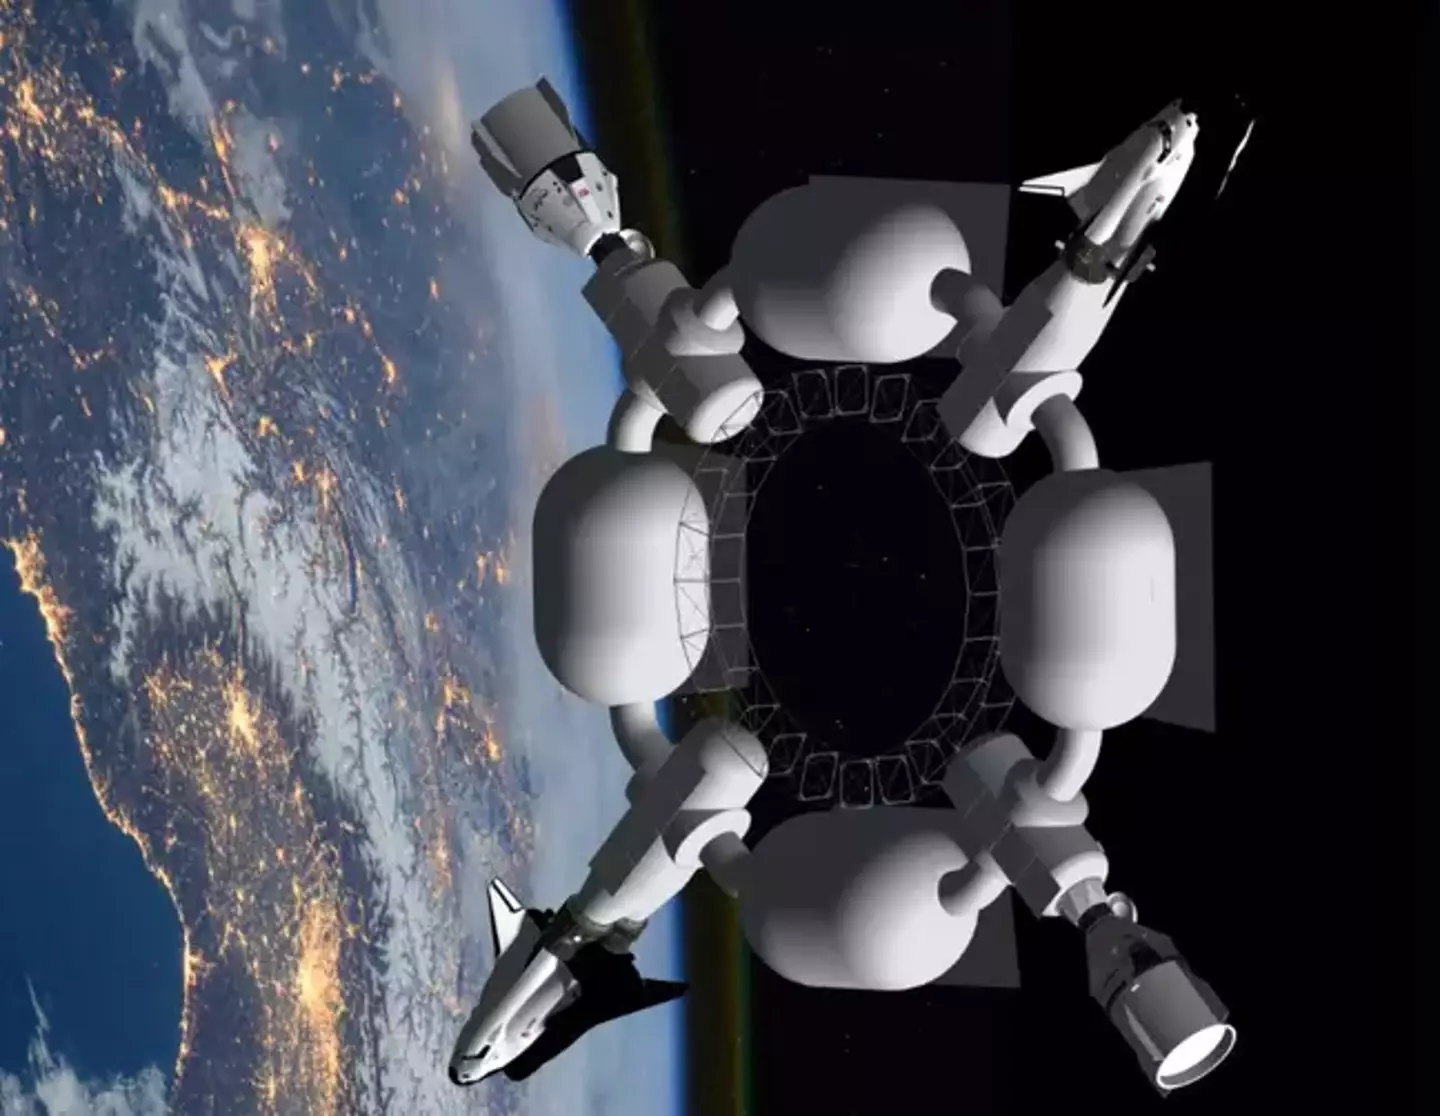 The space hotel could open in just two years.